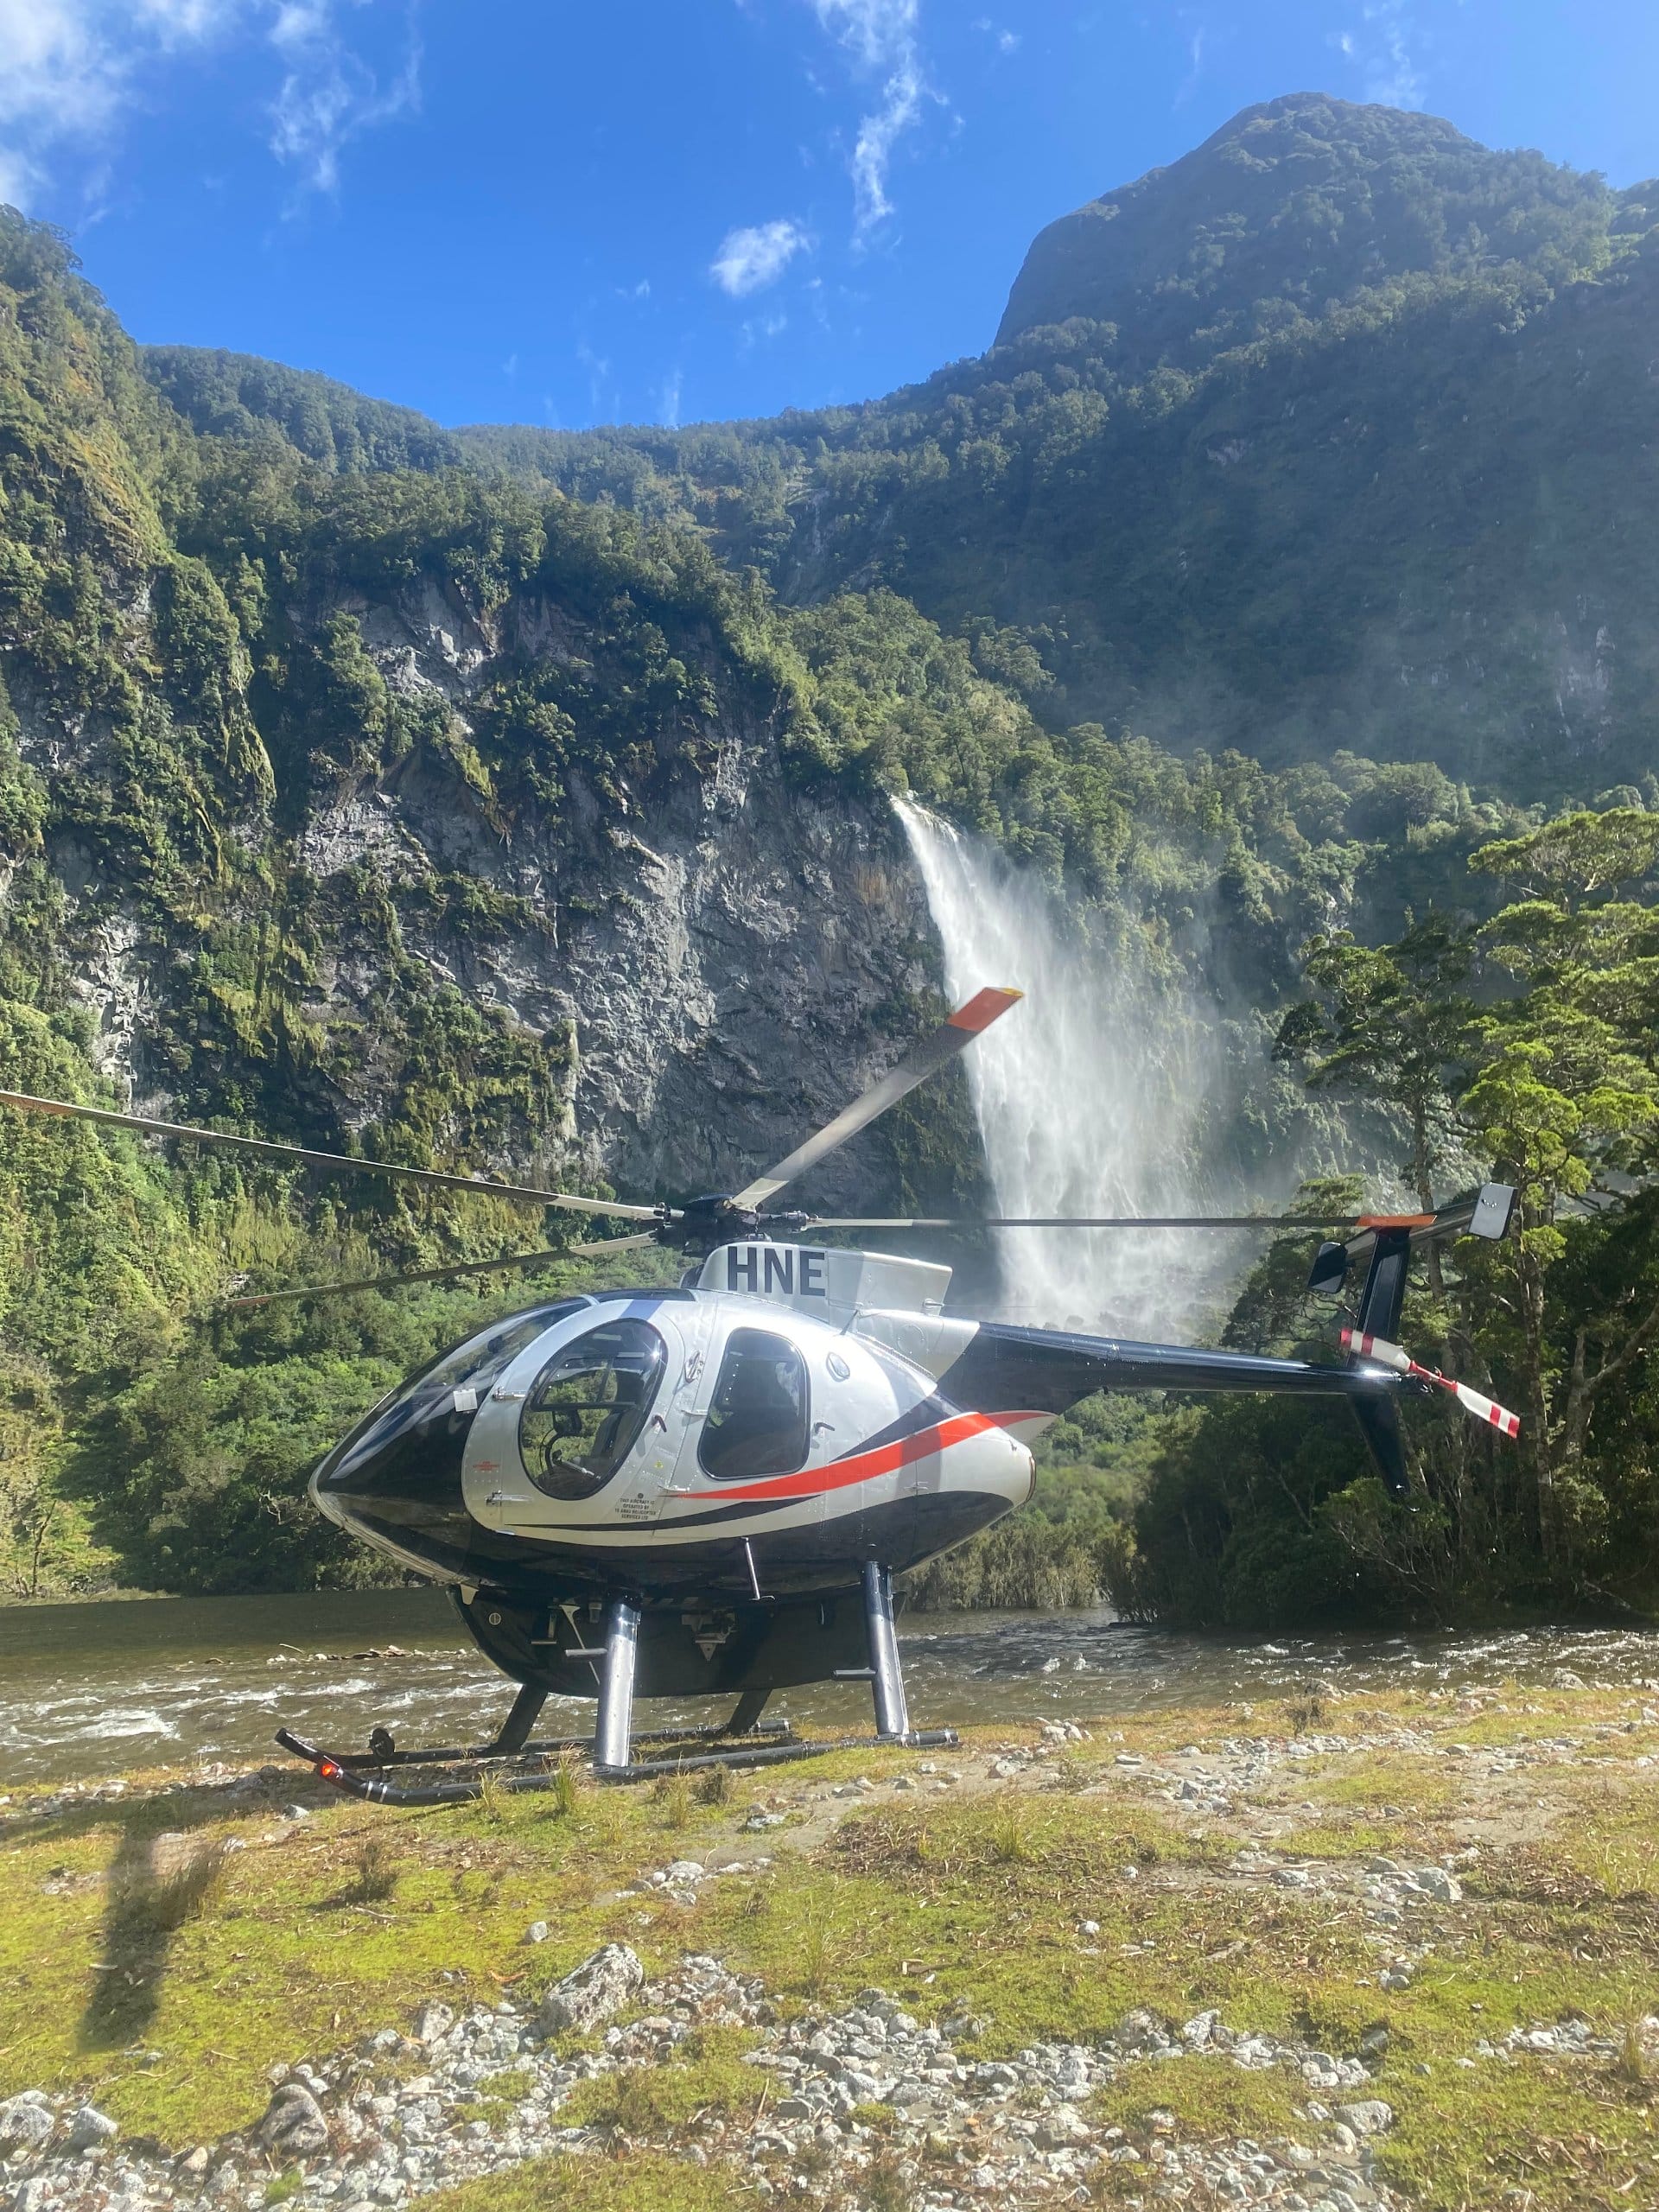 ZK-HNE Helicopter with waterfall in the background